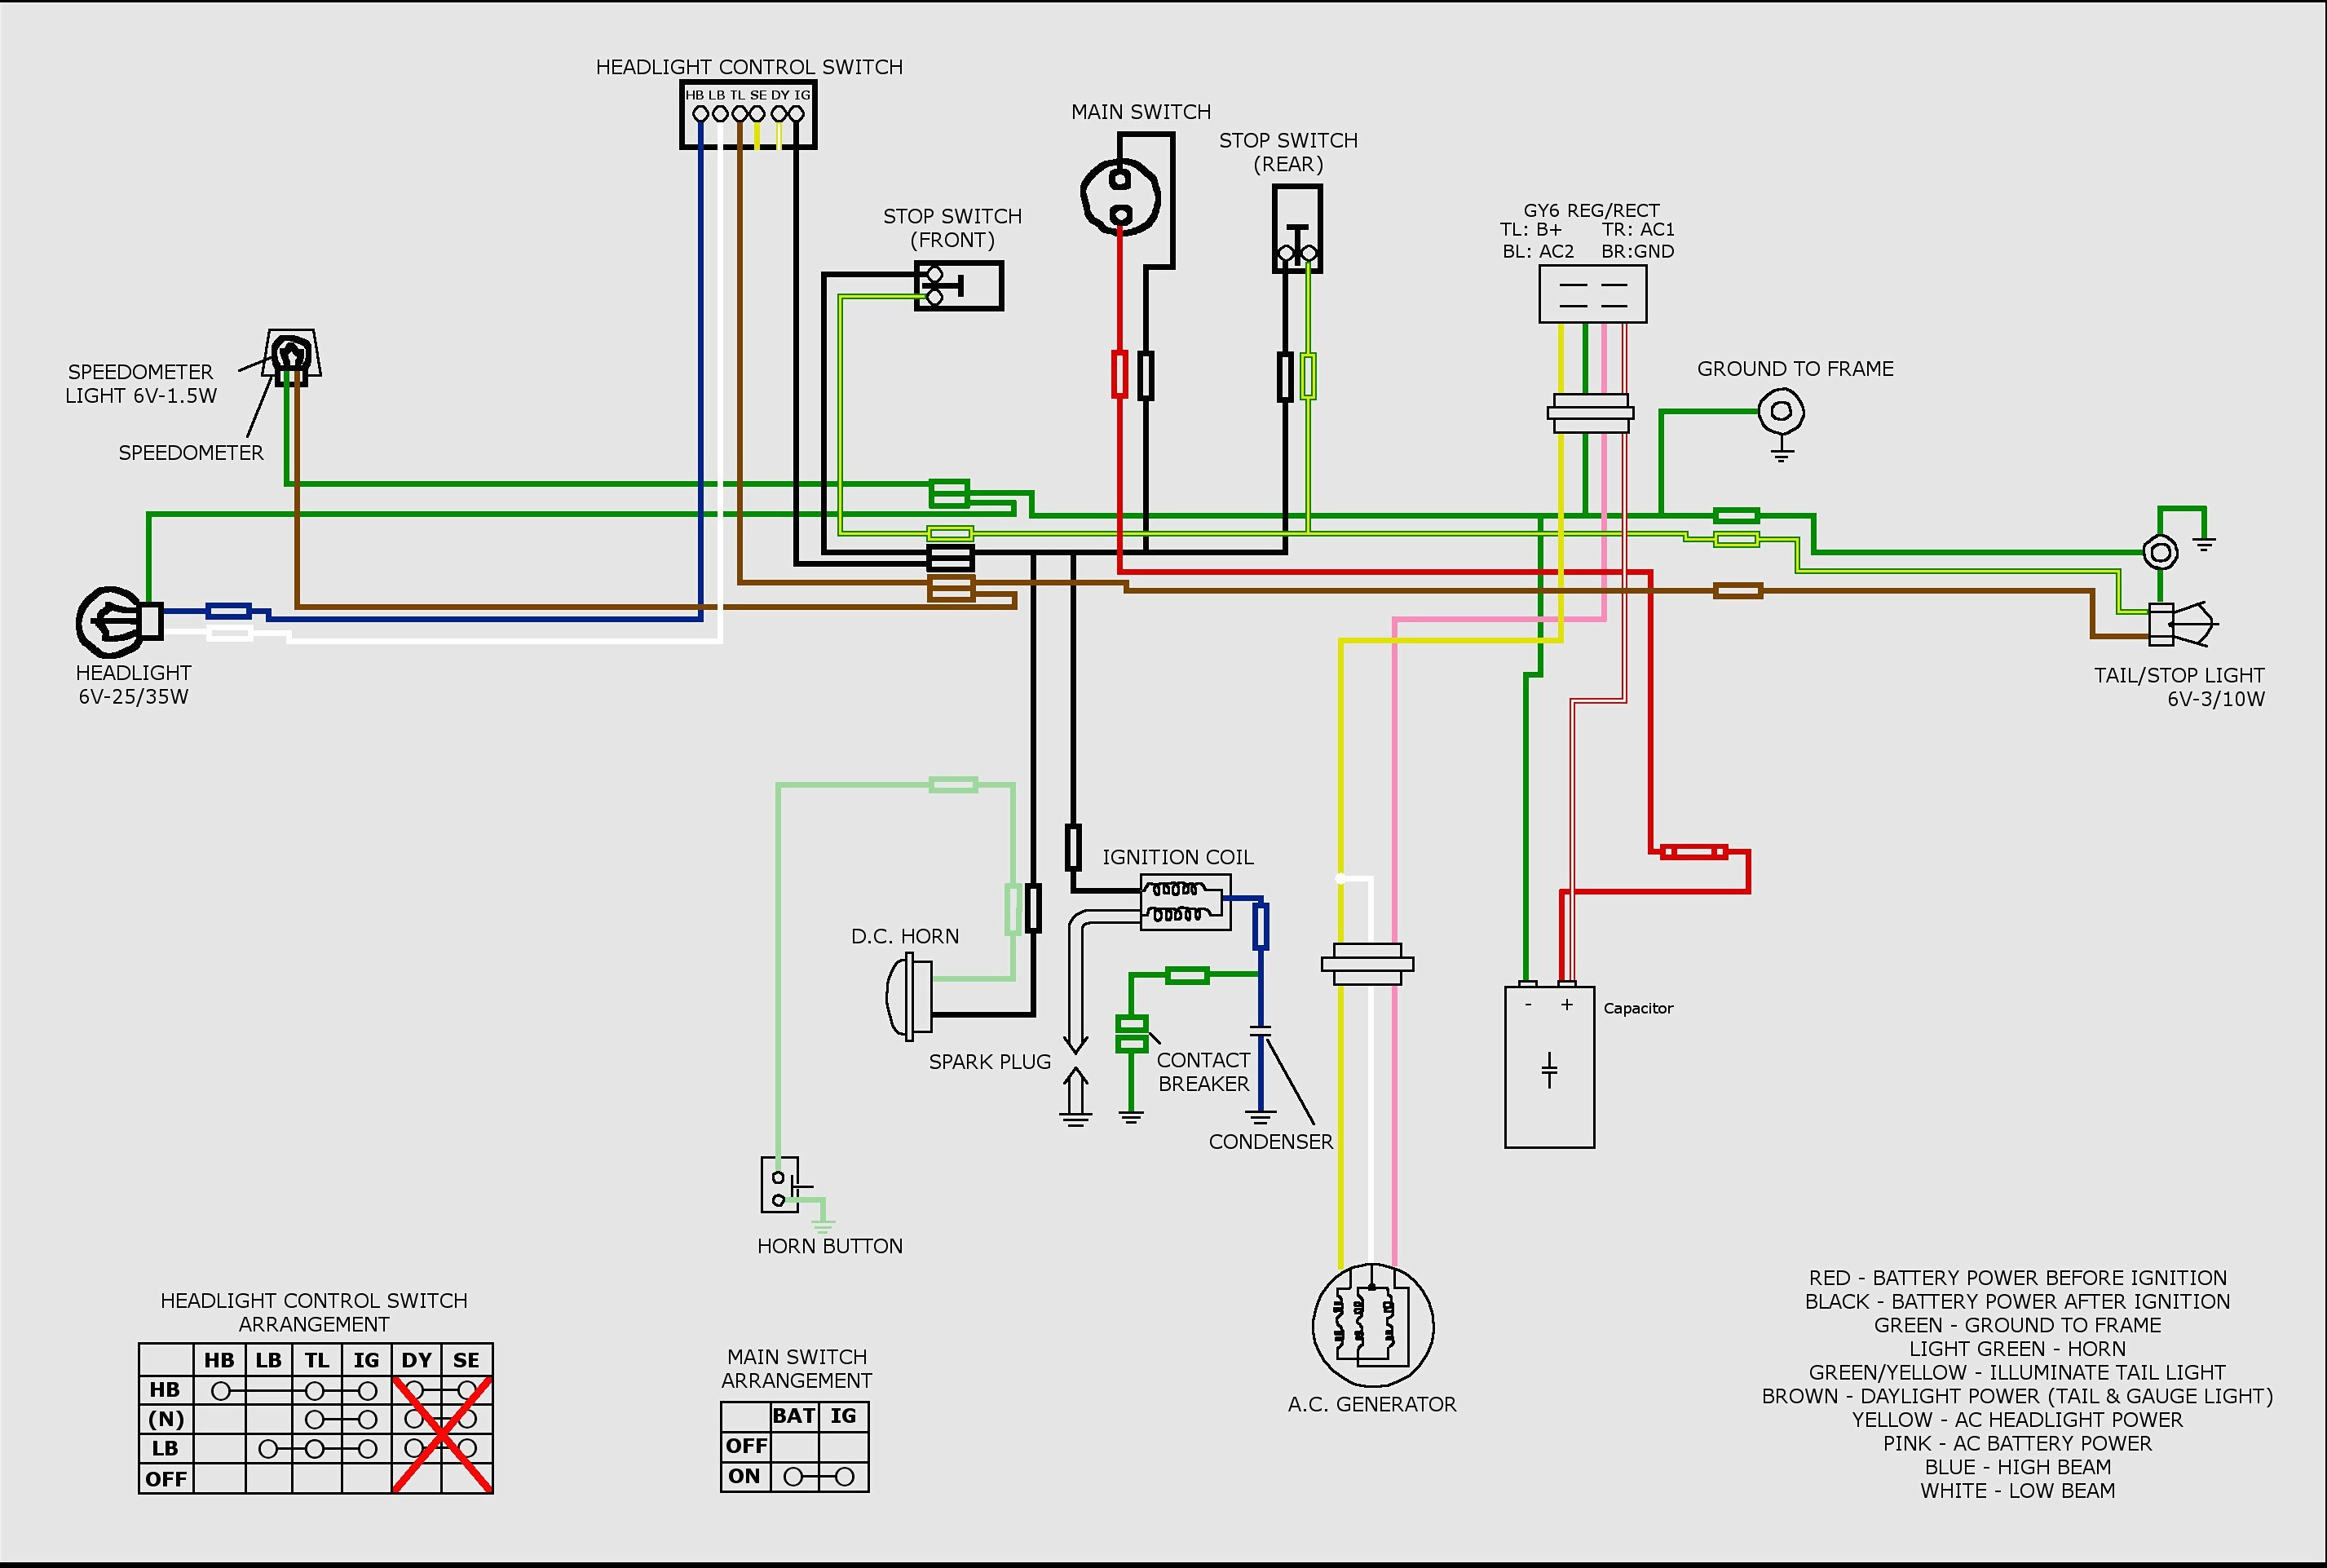 Electric Start Chinese 110Cc Atv Wiring Diagram from lh4.googleusercontent.com